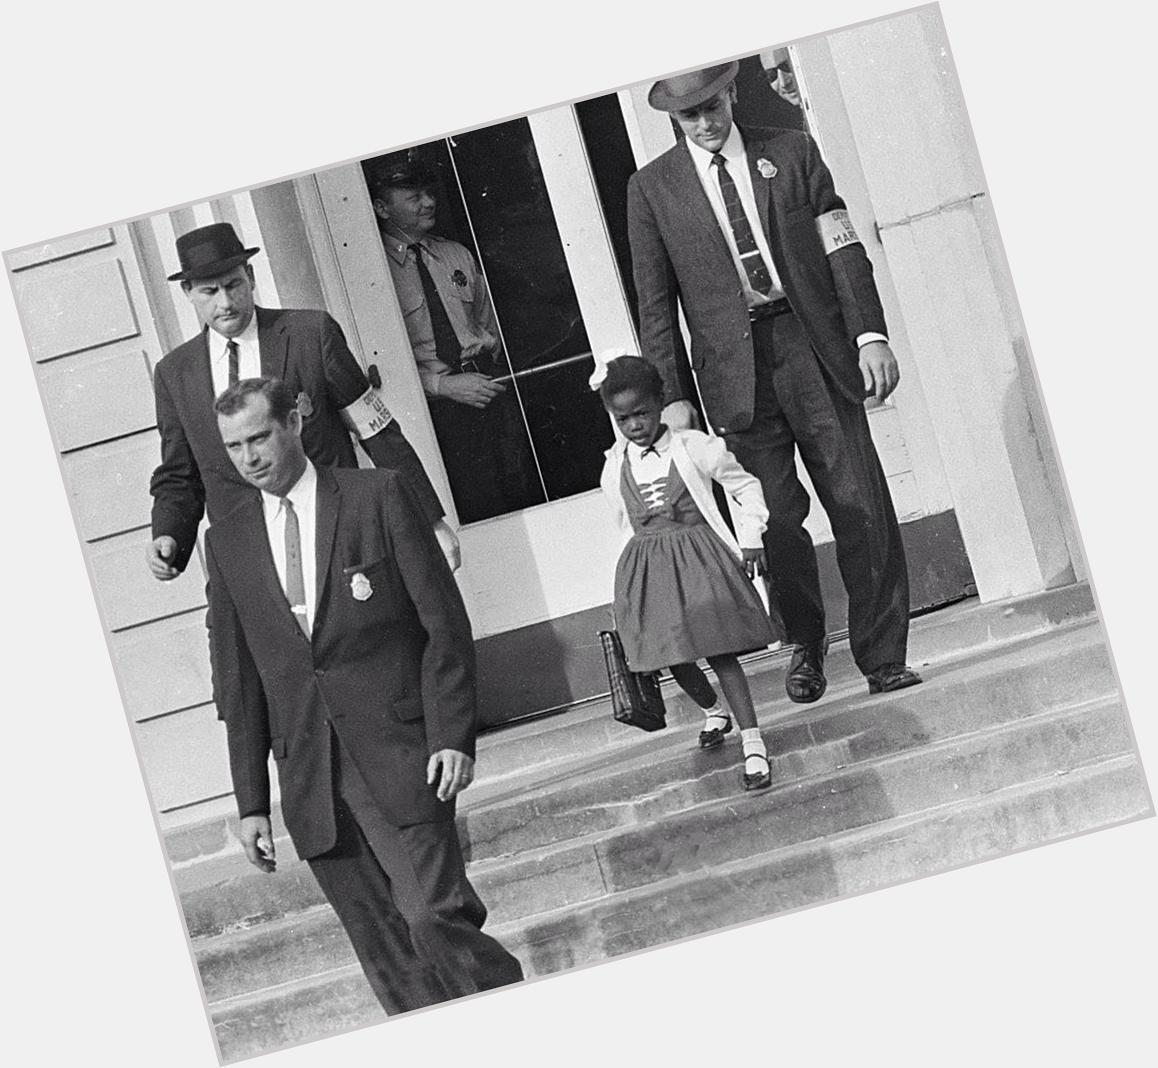 Happy birthday Ruby Bridges who was the first black child enrolled in to an all white school. 